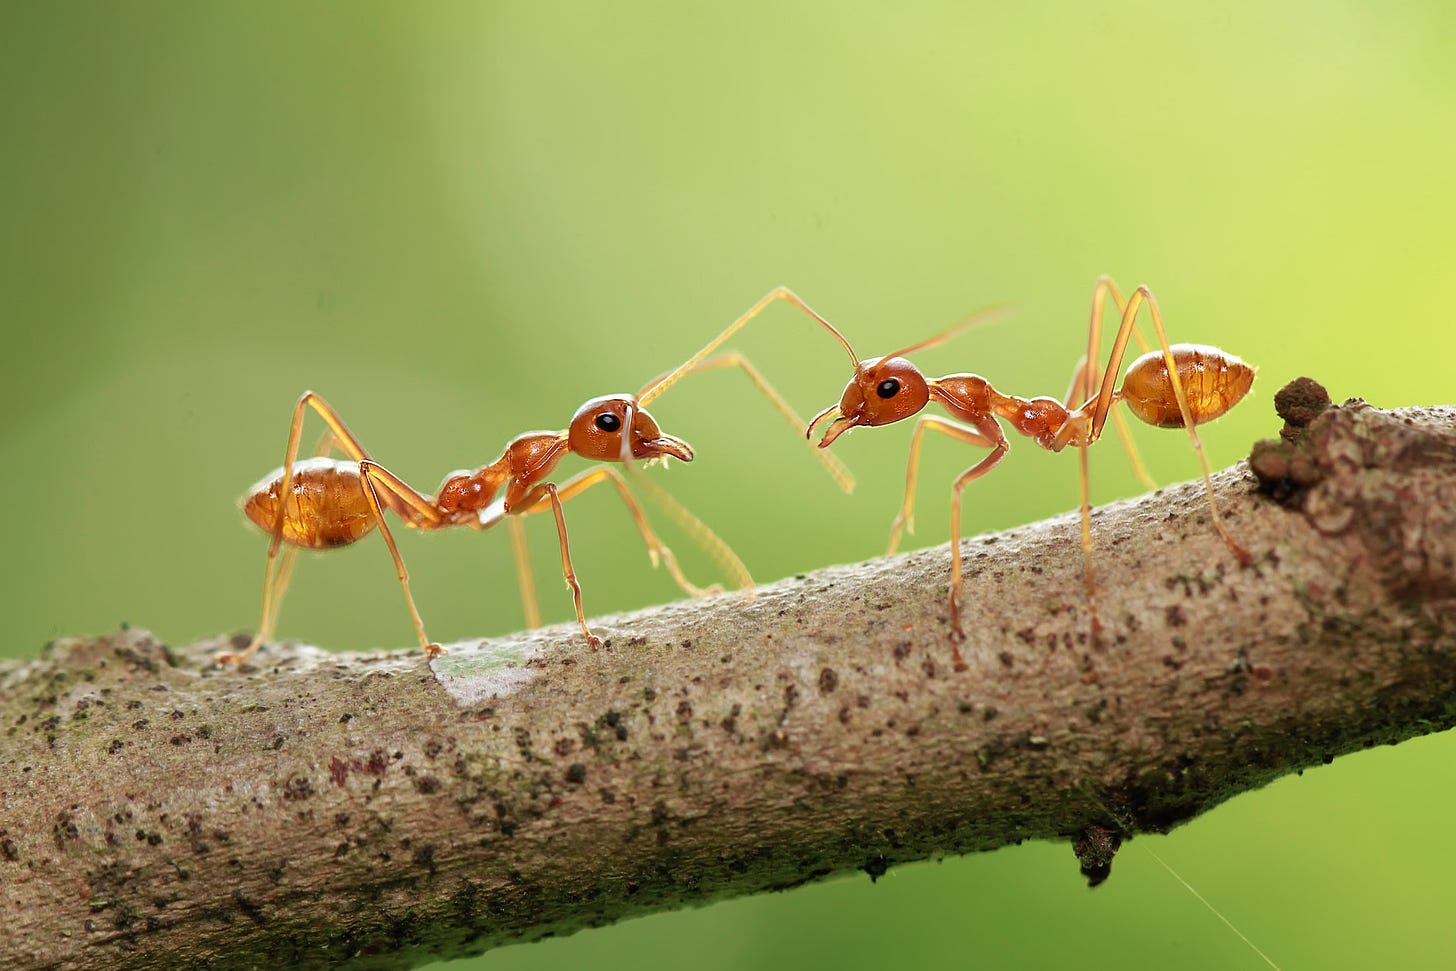 Fire ants in Indonesia.